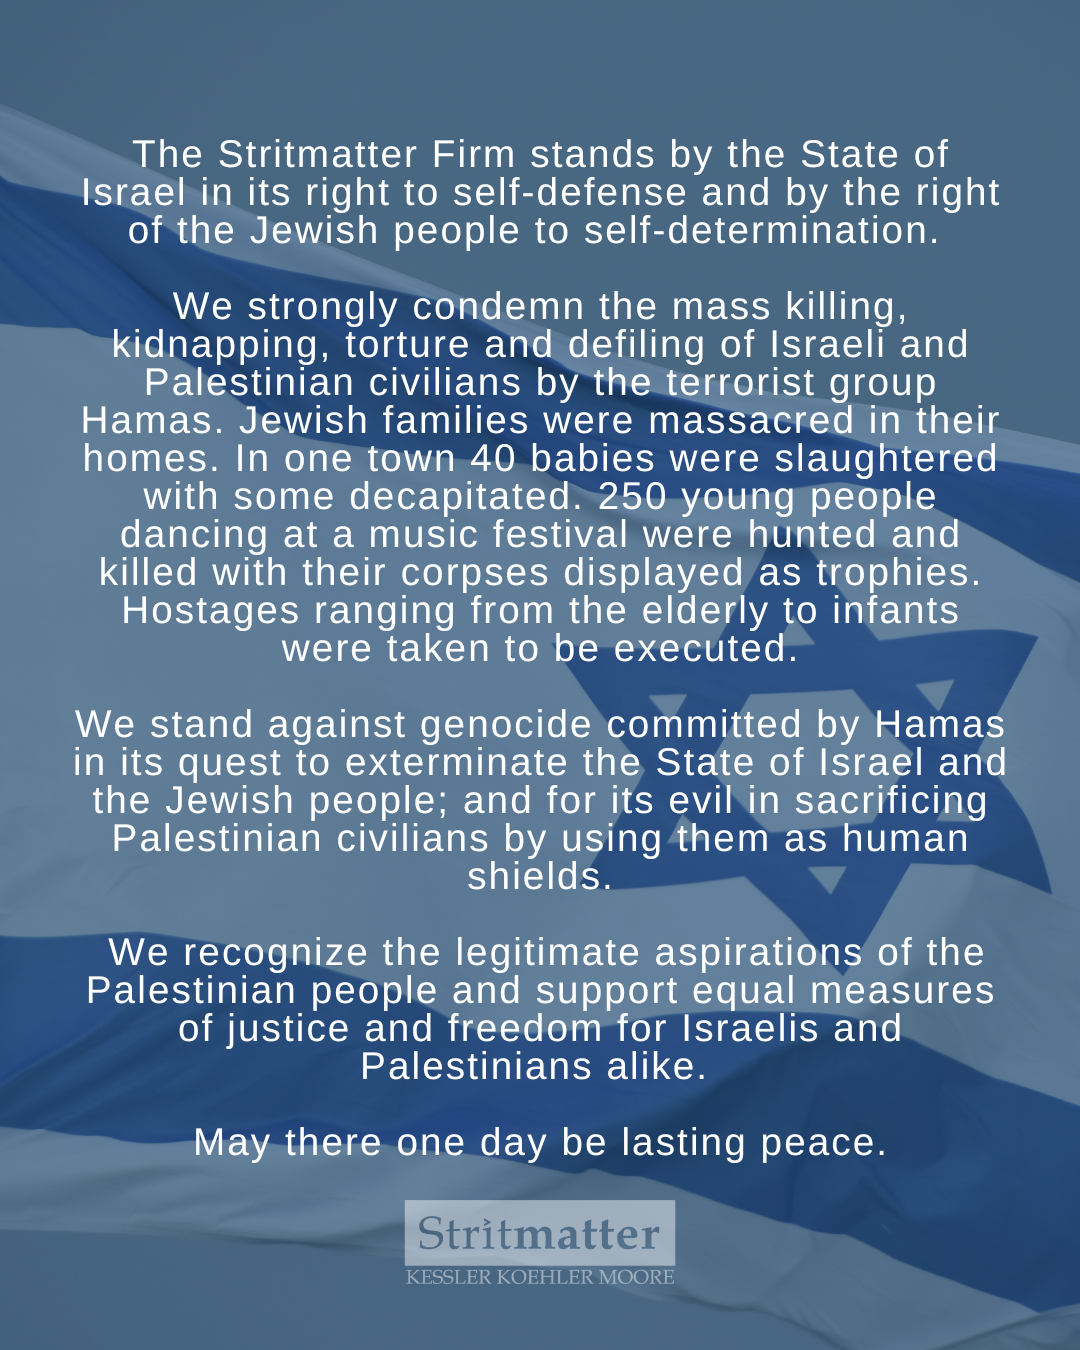 The Stritmatter Firm stands by the State of Israel in its right to self-defense and by the right of the Jewish people to self-determination.